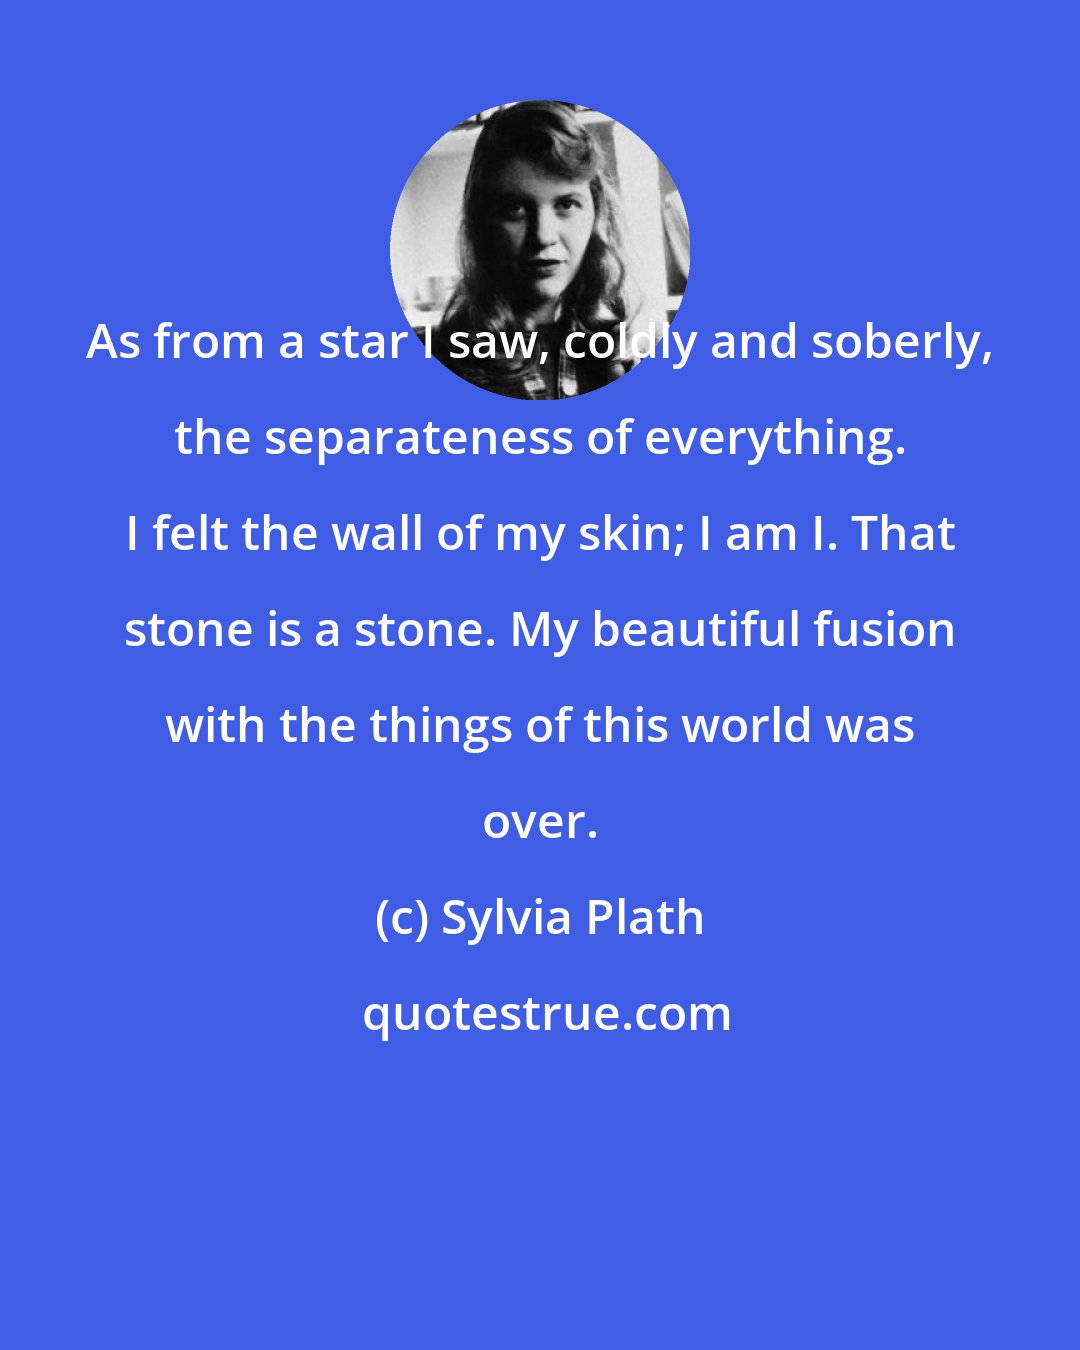 Sylvia Plath: As from a star I saw, coldly and soberly, the separateness of everything. I felt the wall of my skin; I am I. That stone is a stone. My beautiful fusion with the things of this world was over.